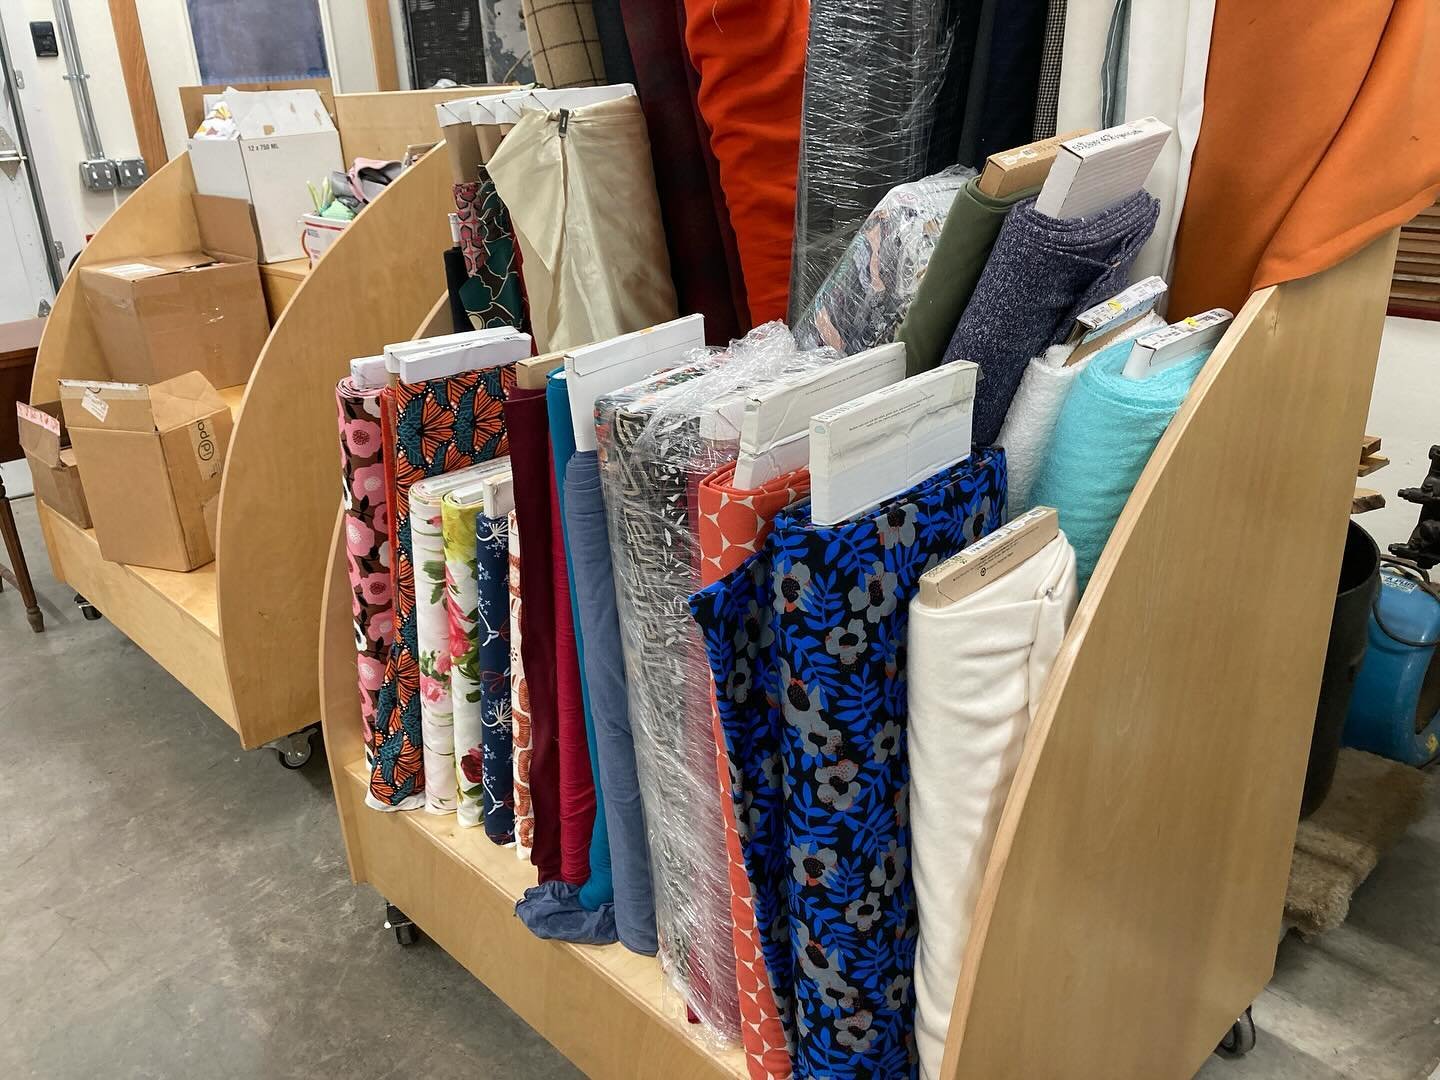 Last chance final clearance sale Wednesday, Dec 27, noon-5. Buy fabric, patterns, notions, old sewing machines. And more! See our bio for the location.